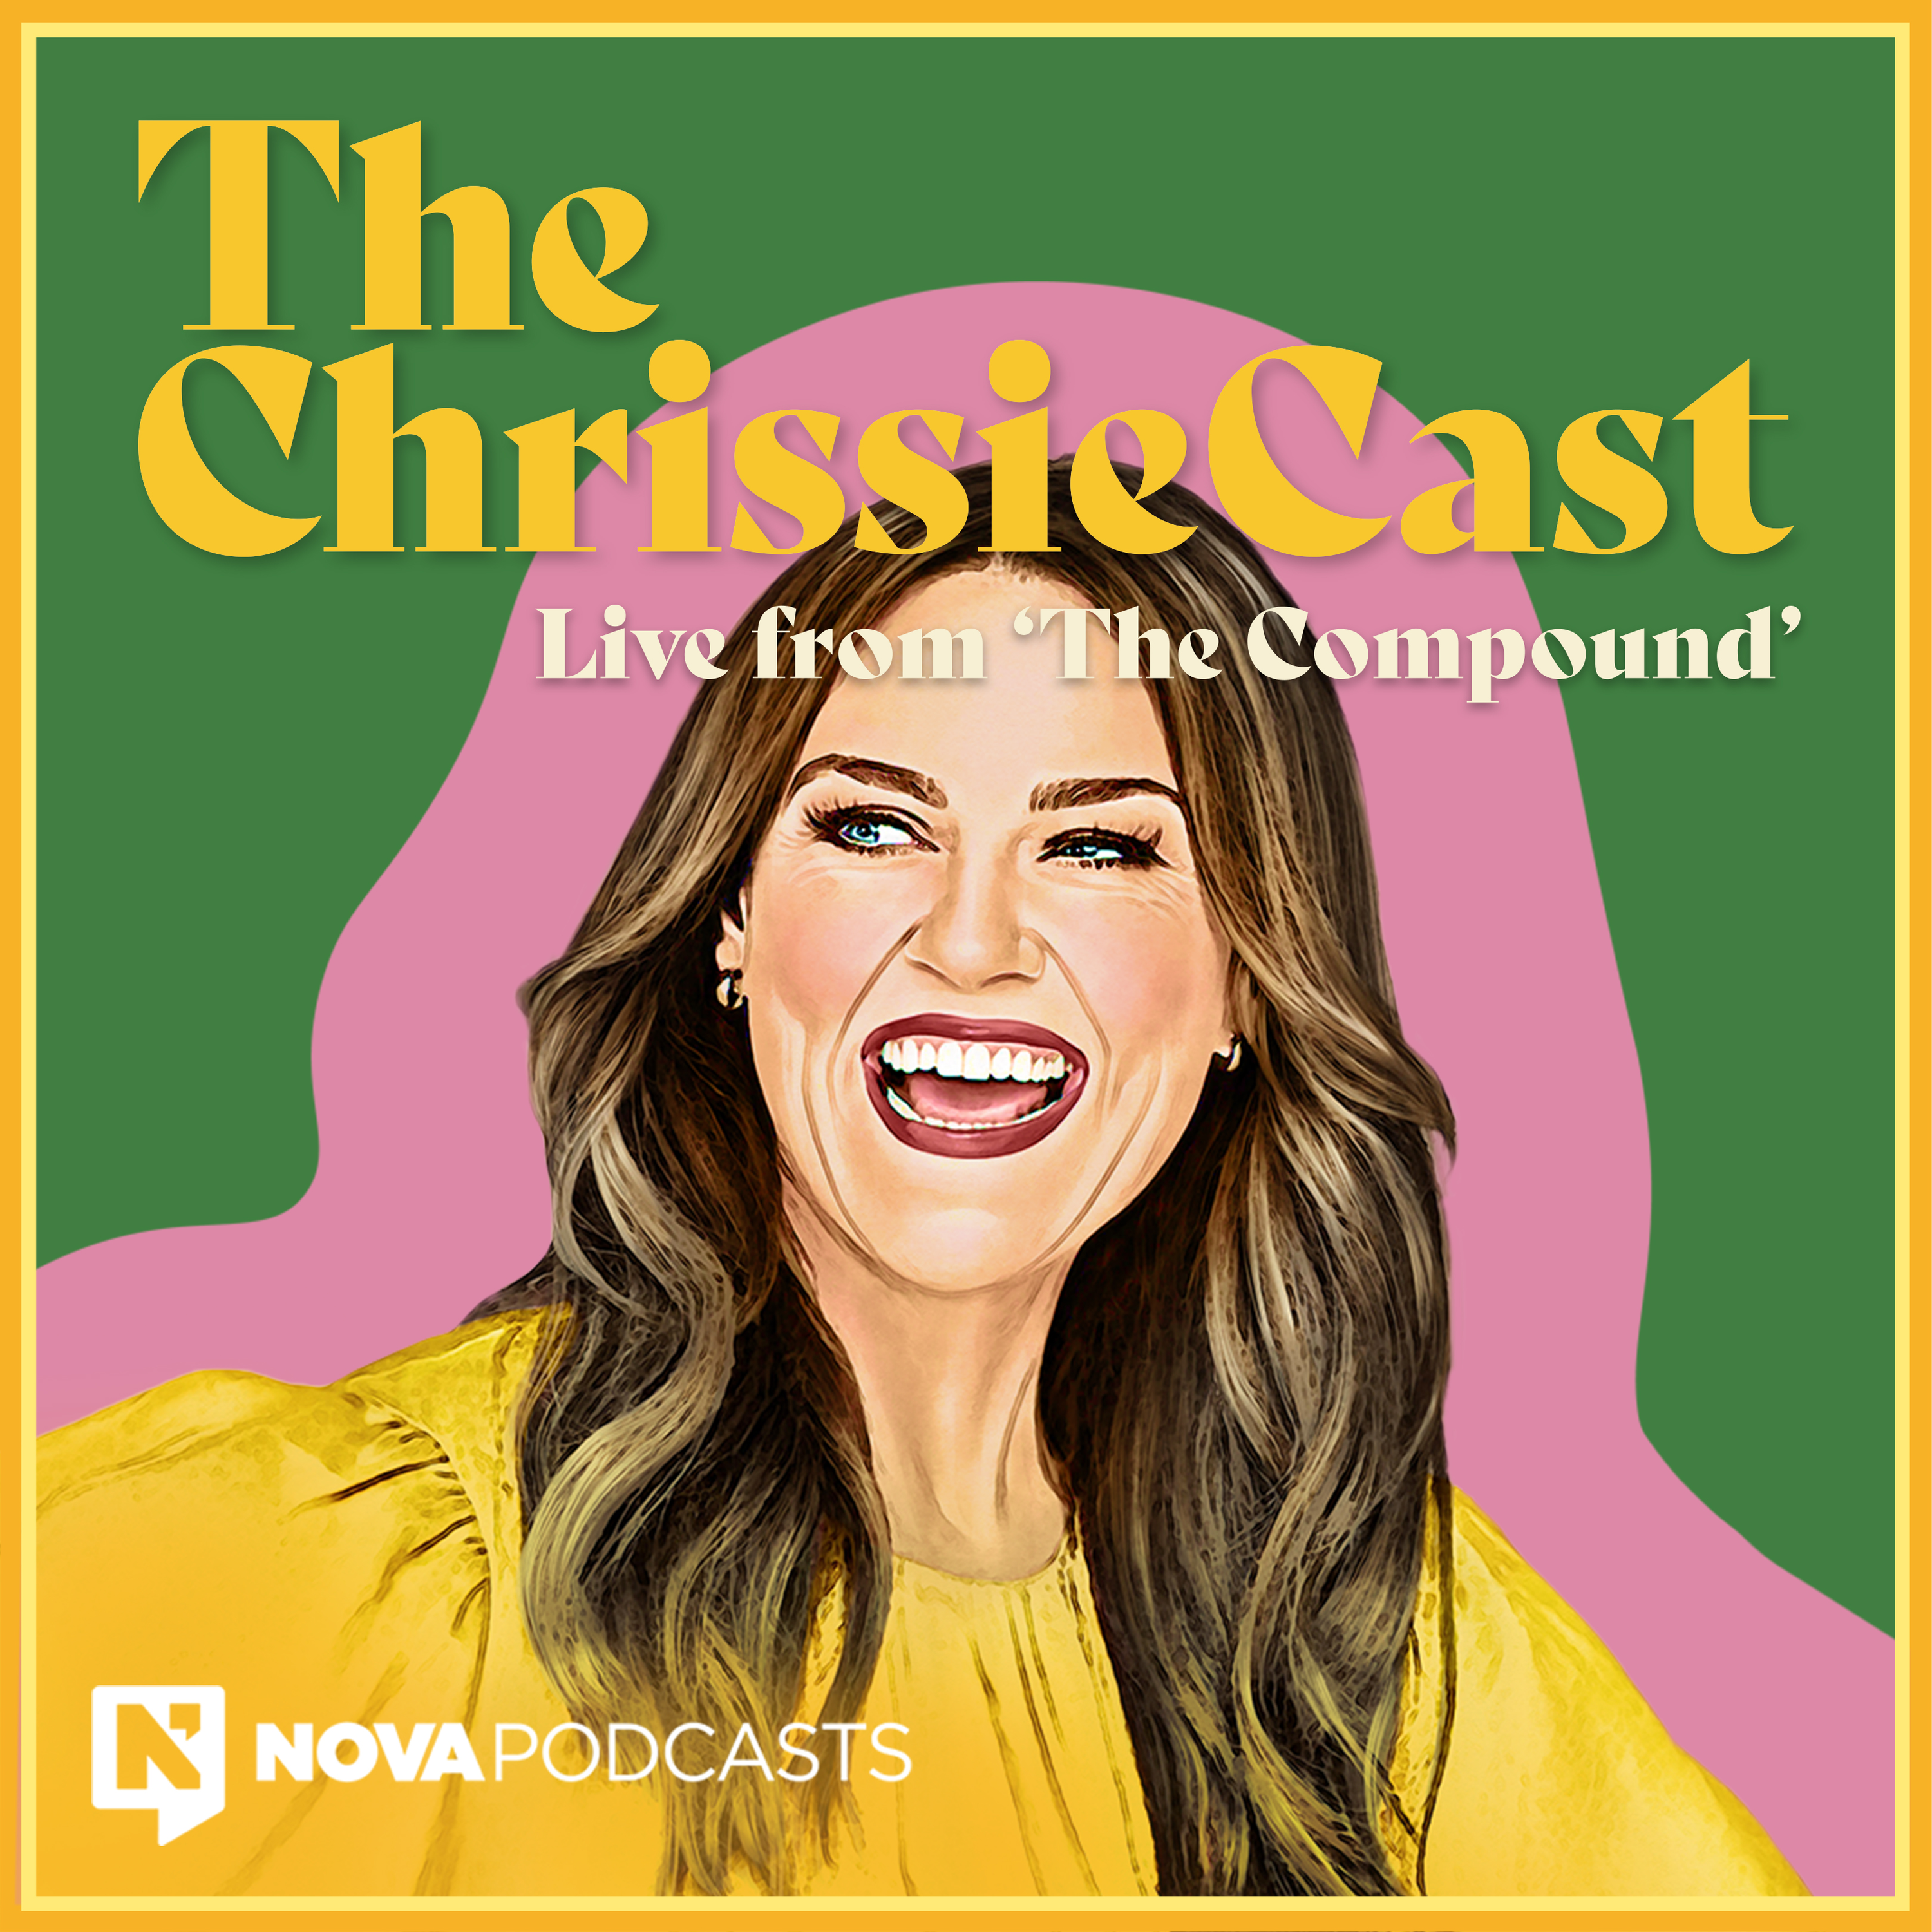 The ChrissieCast: Tim Minchin, Septuple Threat, Talks All Things The Word ‘Moist’, Chrissie Cries And An Impromptu Rendition Of Tenterfield Saddler